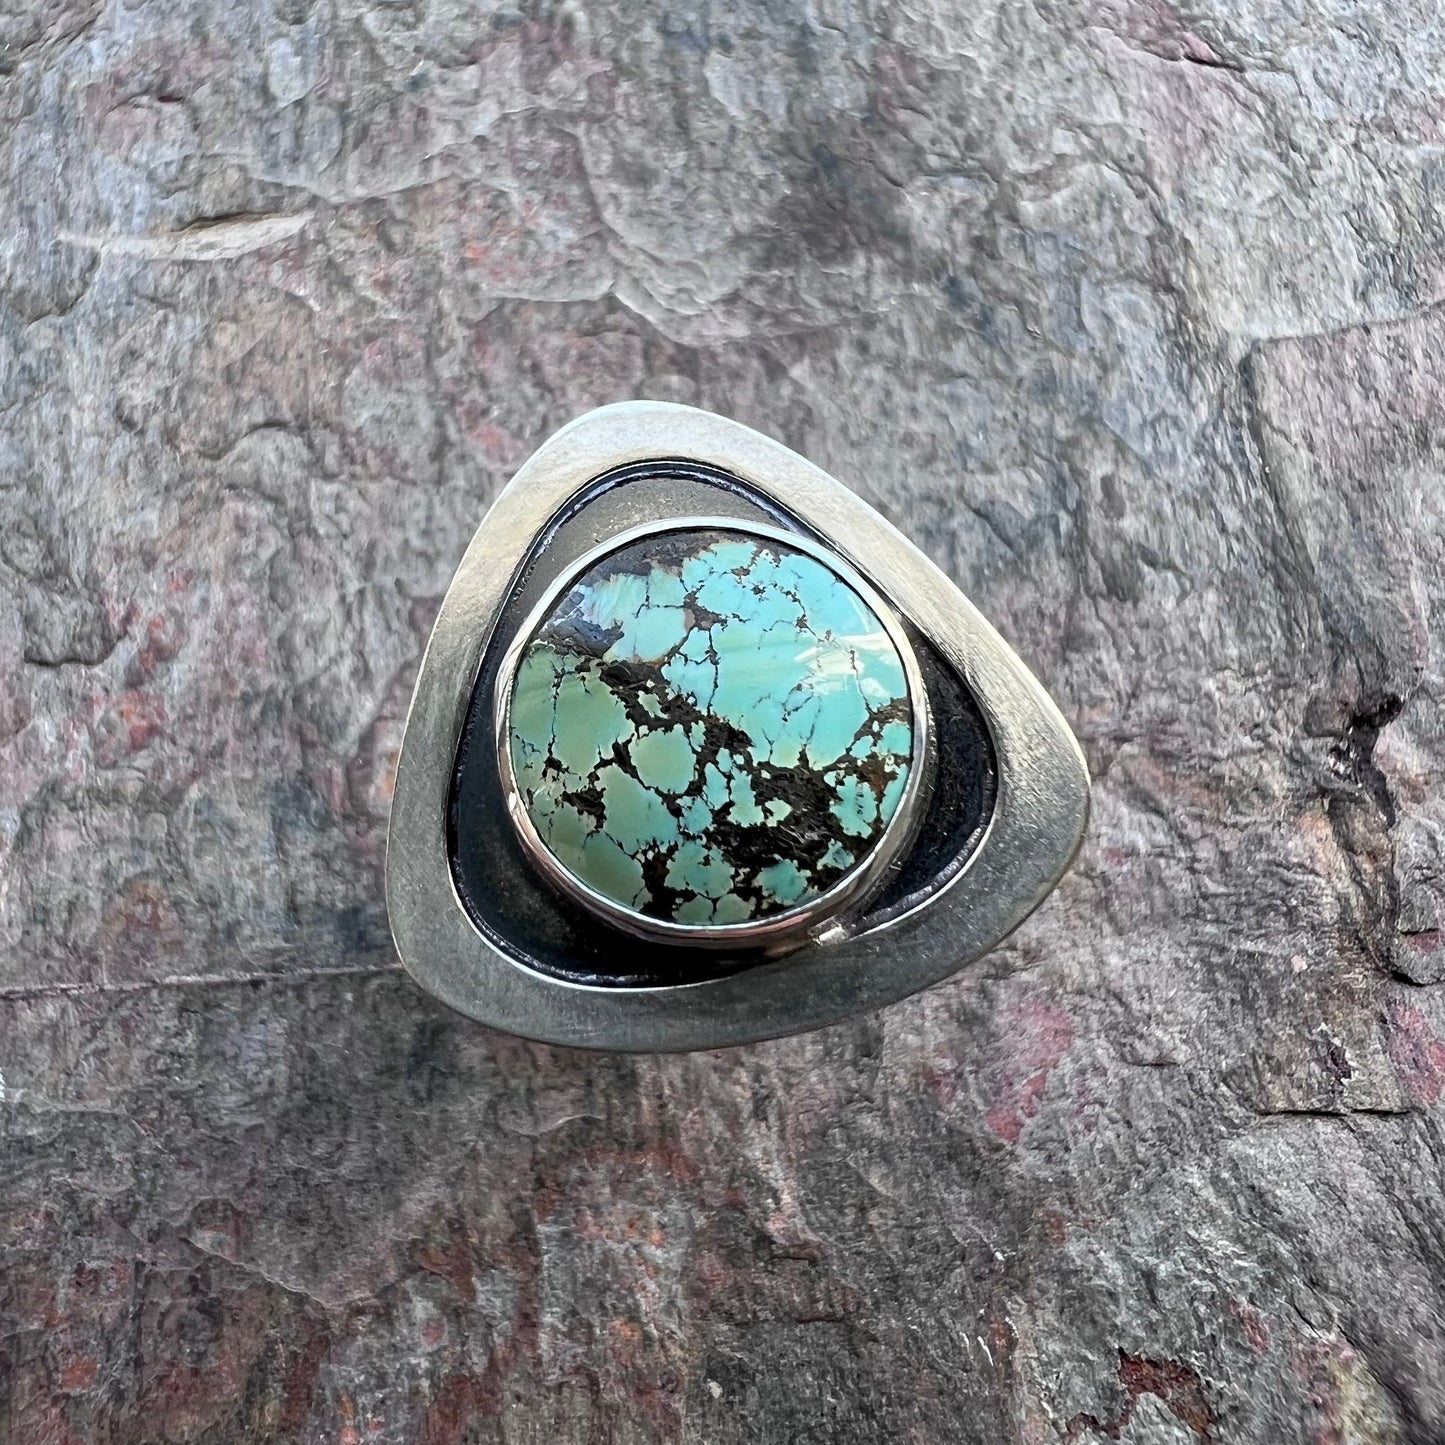 Turquoise Sterling Silver Ring - Genuine Turquoise Handmade One-of-a-kind Artisan Ring - Size 8.5